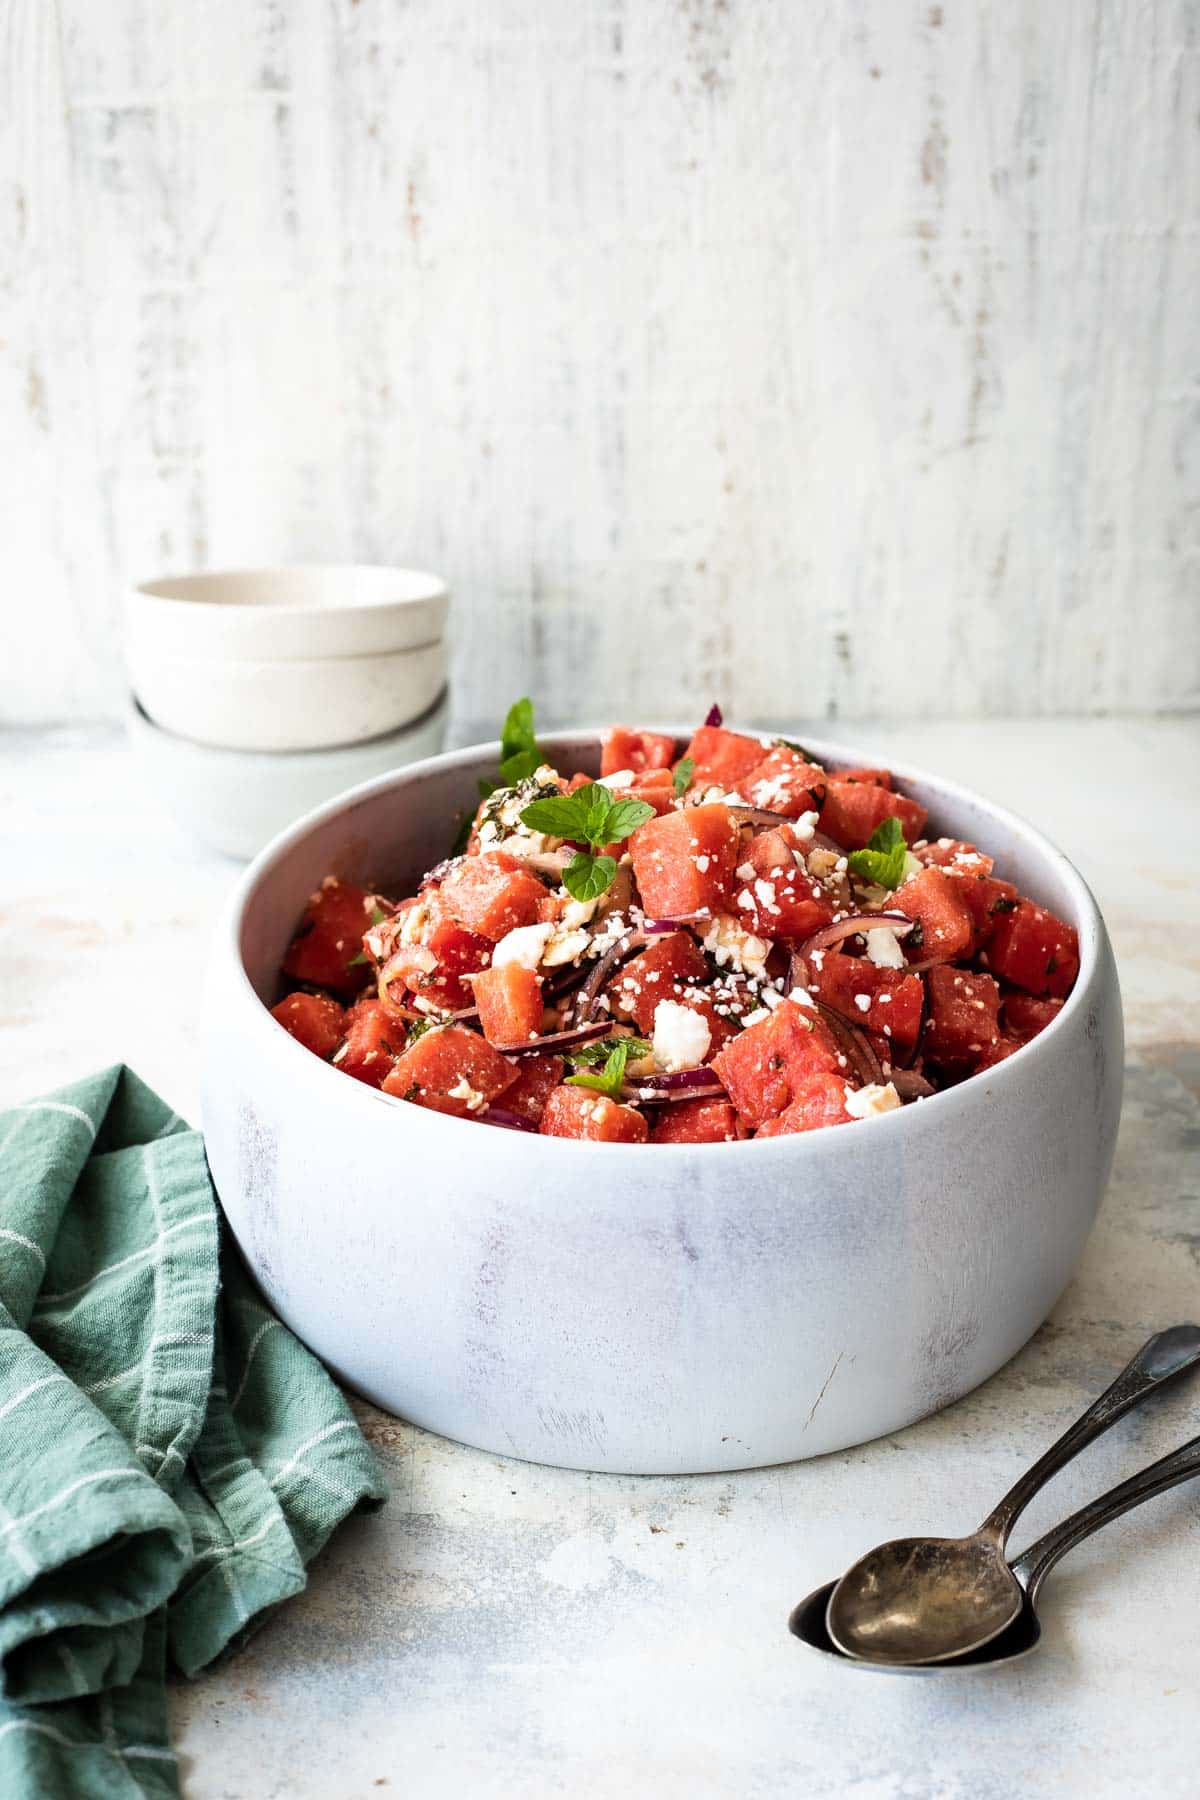 A marble serving bowl filled with Watermelon Salad.